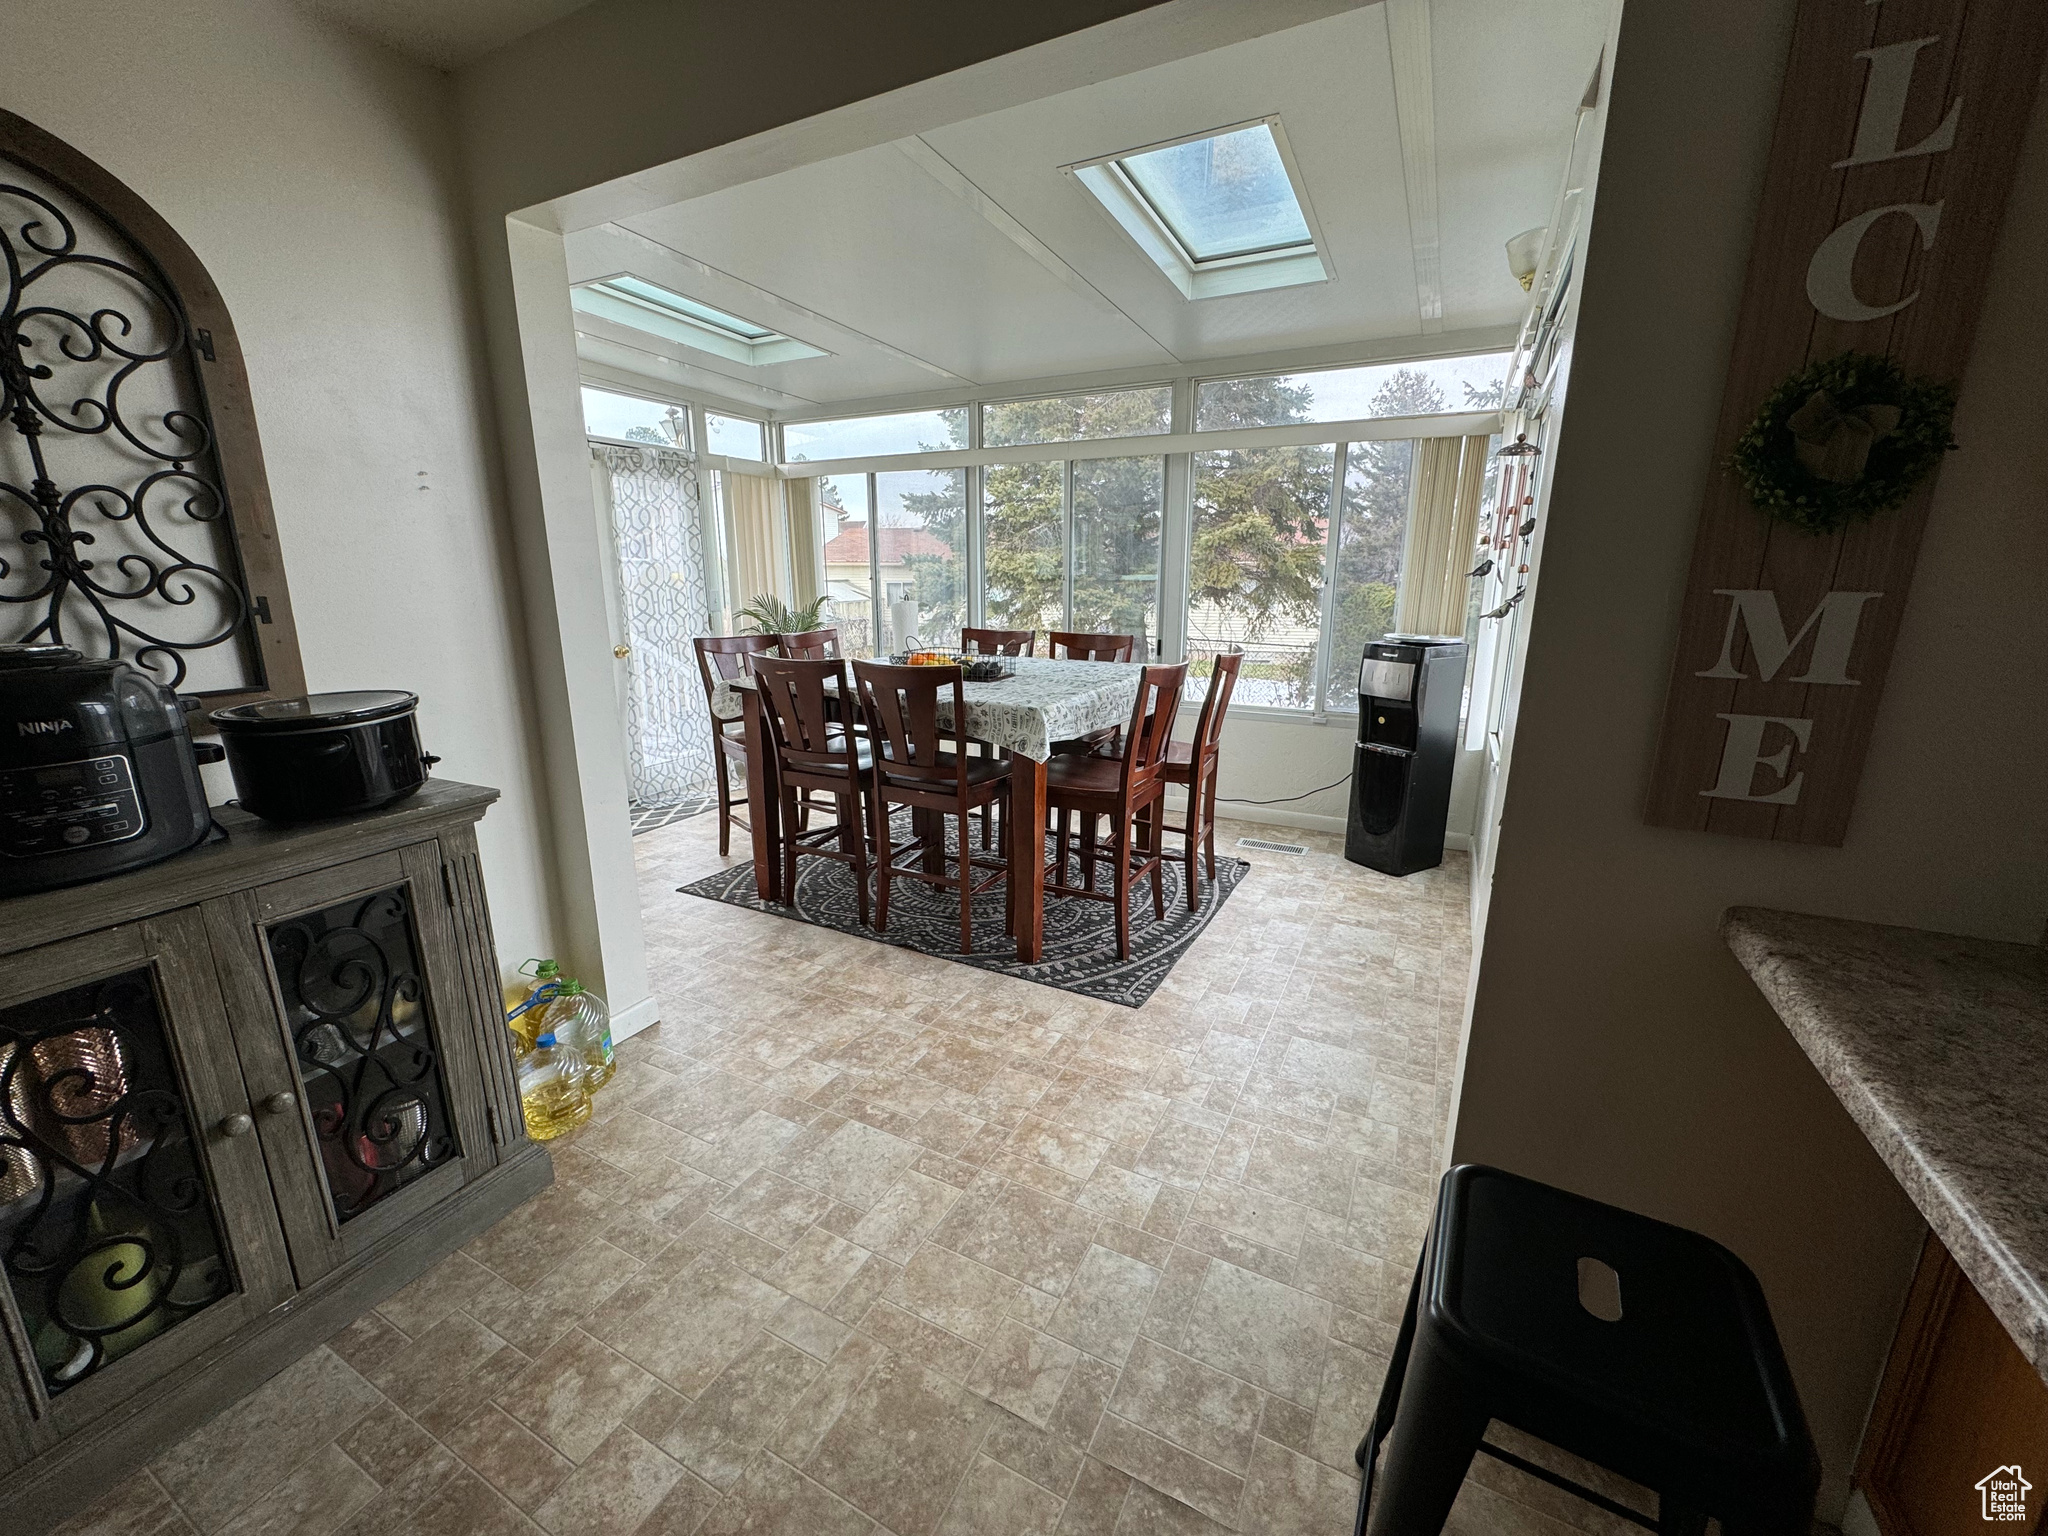 Tiled dining space featuring a skylight